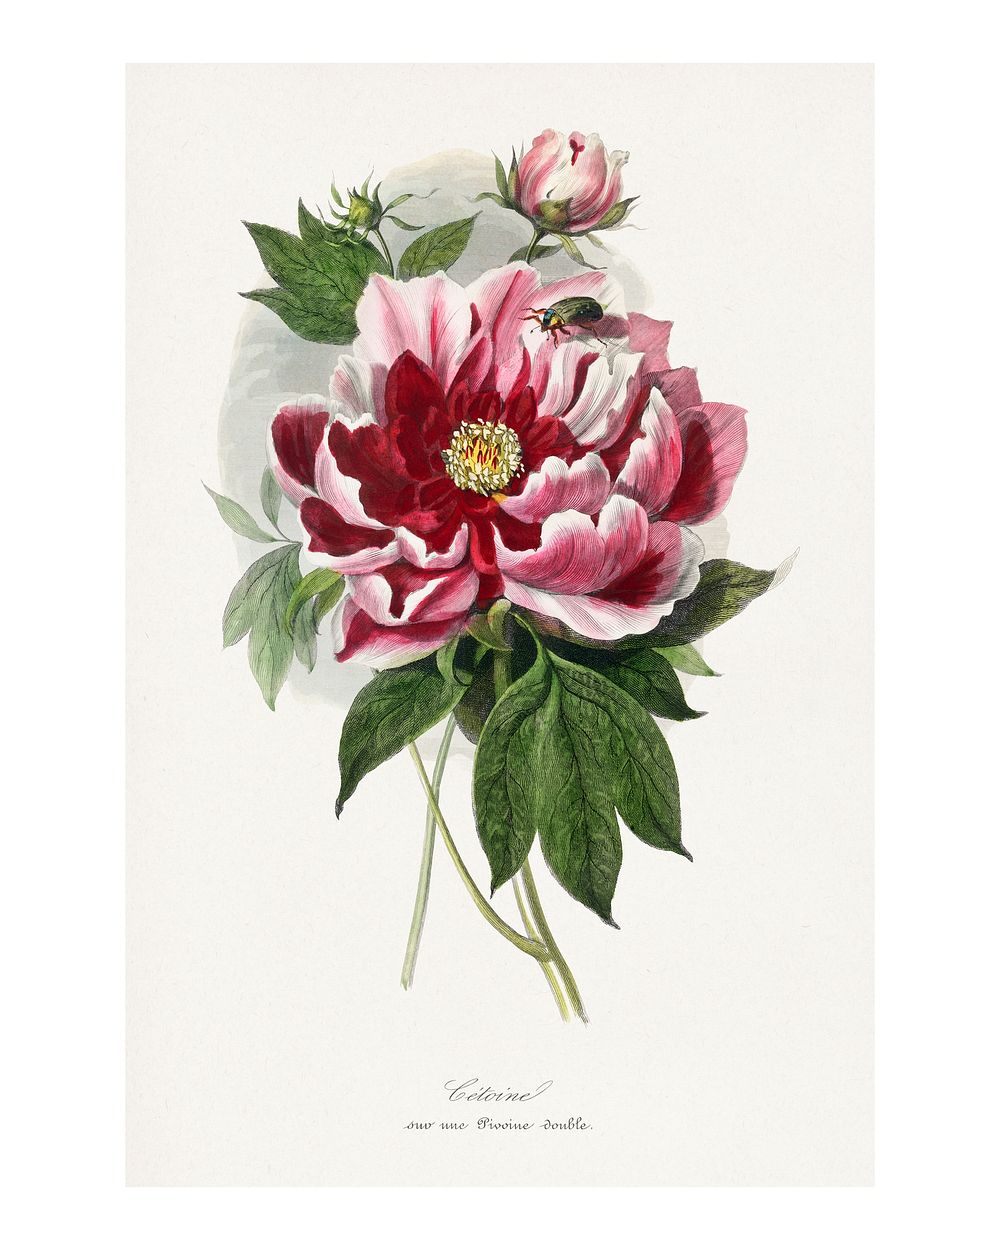 Peony flower poster painting. Digitally enhanced from our own original copy of Le Jardin Des Plantes (1842) by Paul Gervais.